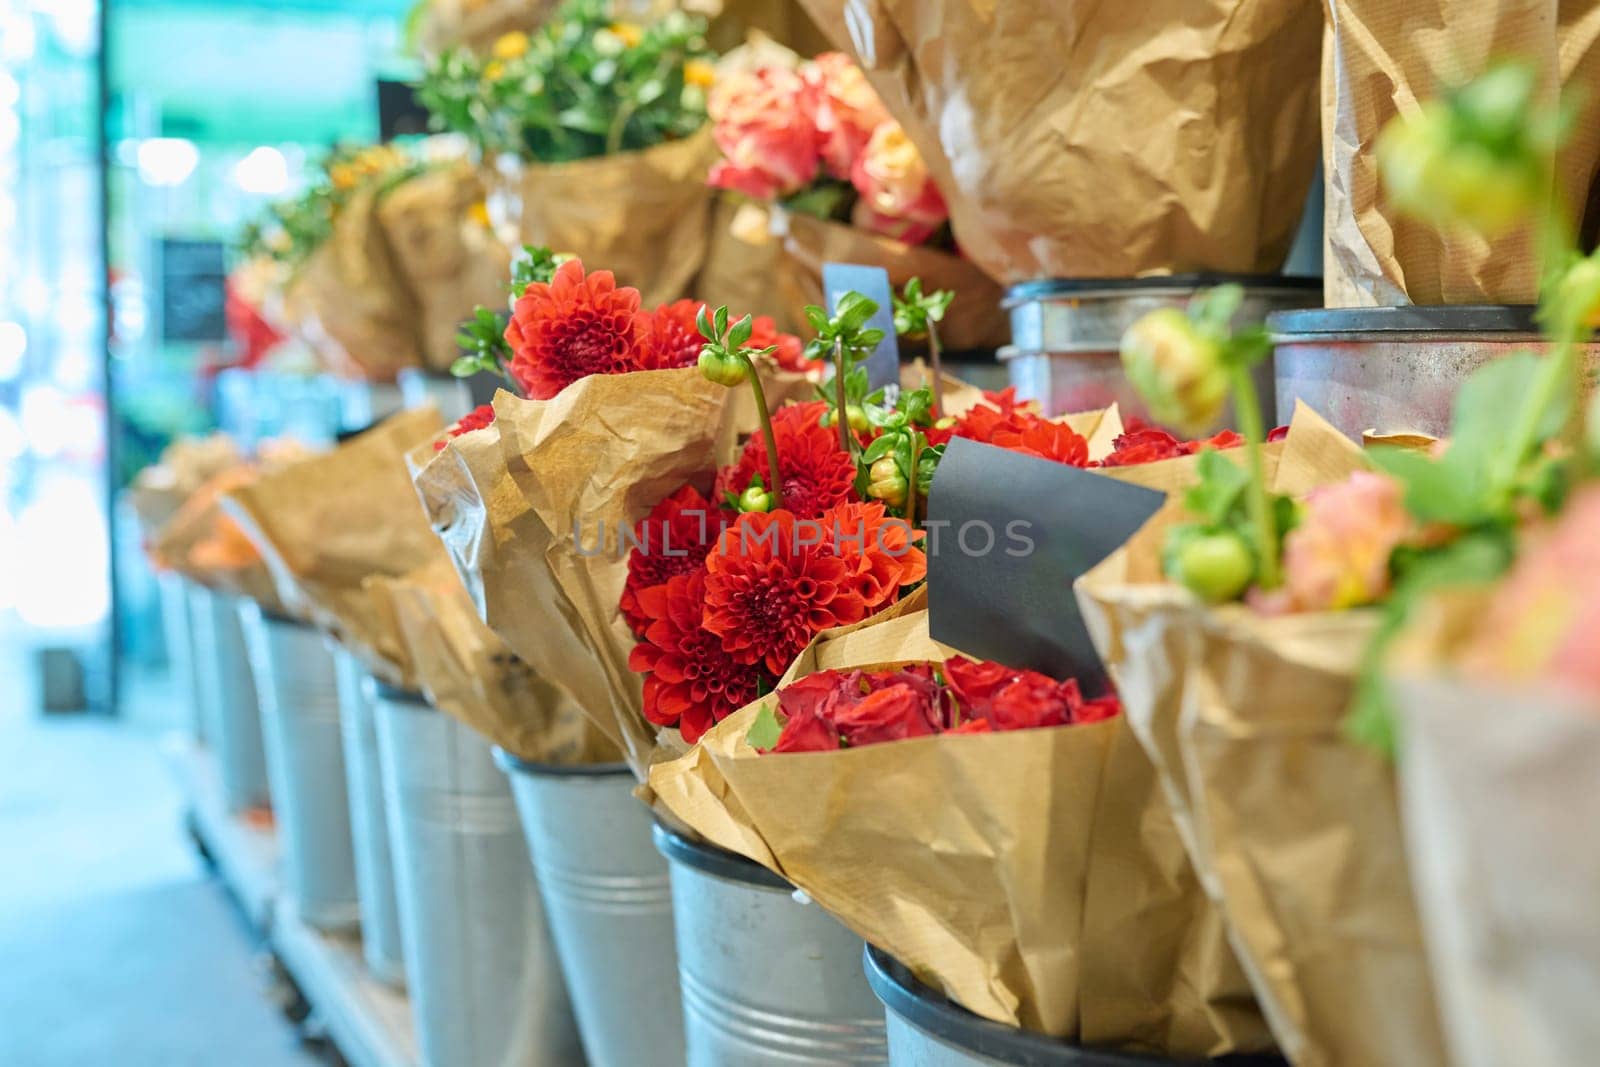 Flower shop, close-up of fresh flowers in buckets, red dahlias. Floristics, small business, flower decoration of apartments, houses, offices, gifts for holidays, summer autumn season